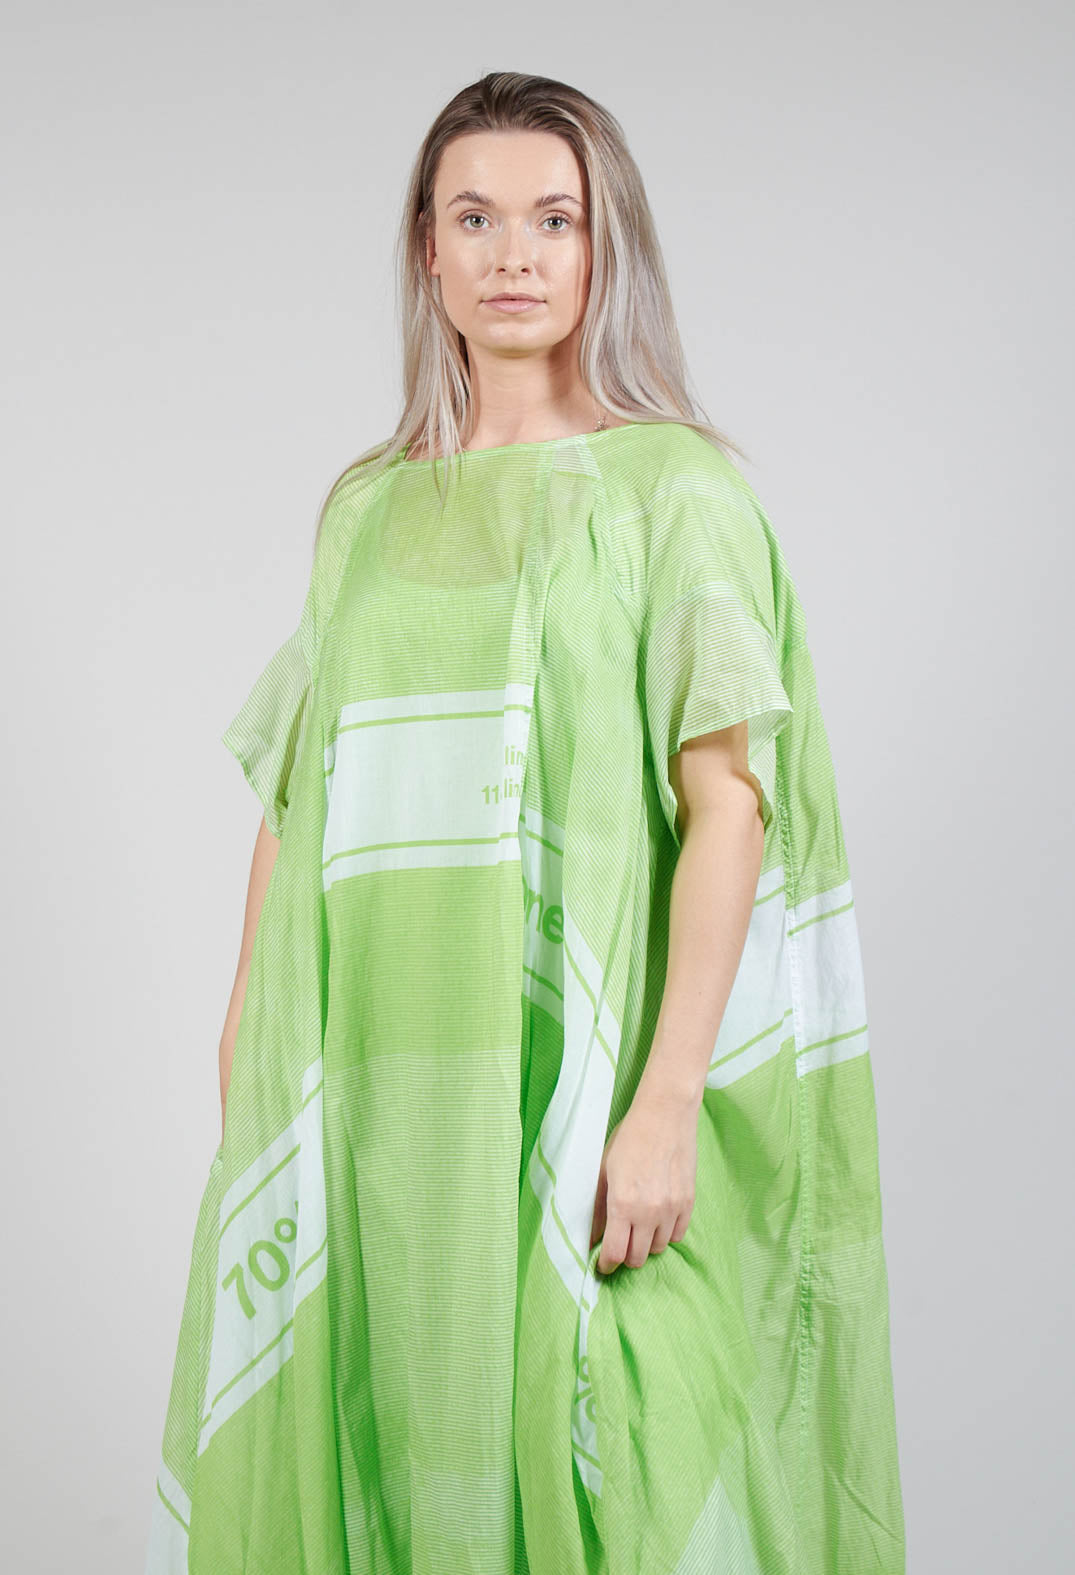 Short Sleeve Cotton Dress in Lime Print